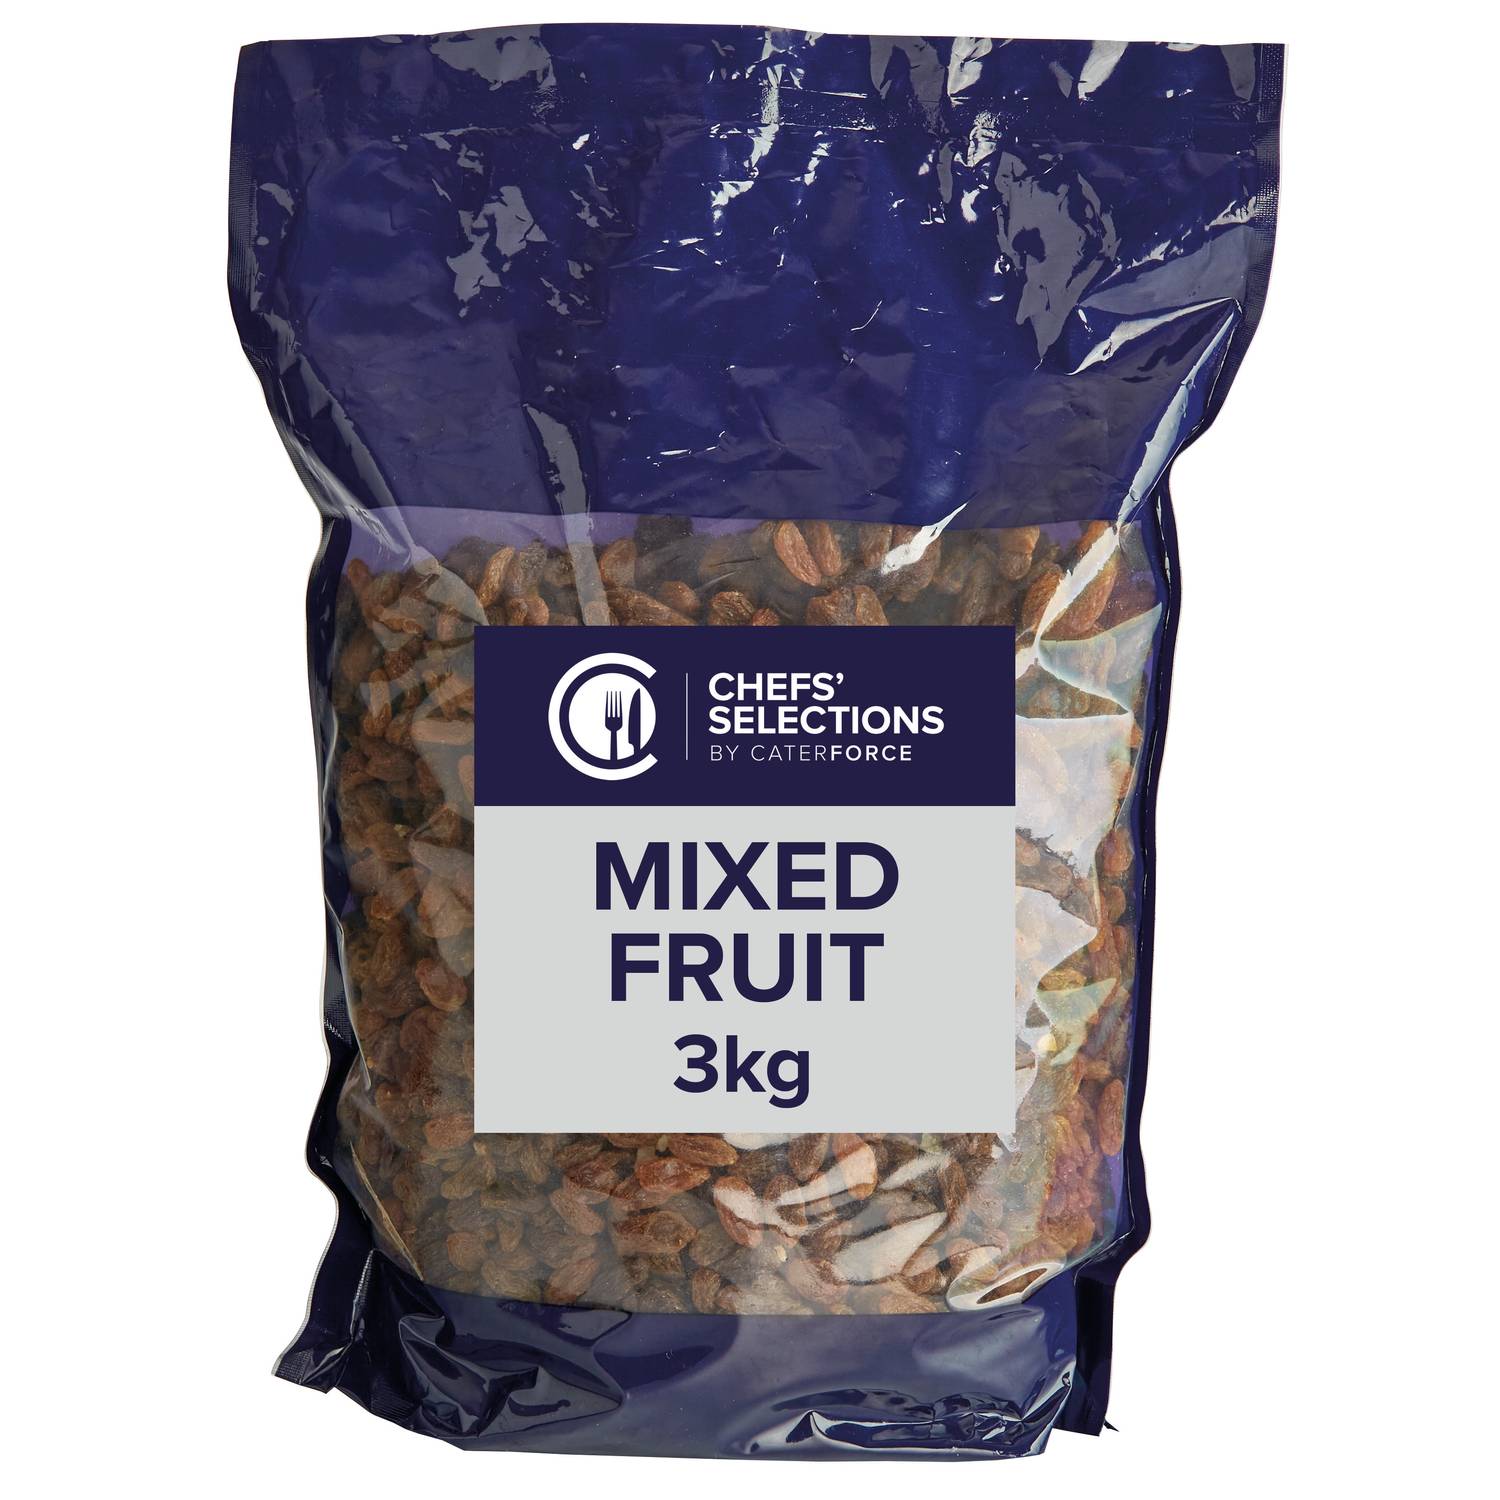 Chefs’ Selections Mixed Fruit (4 x 3kg)